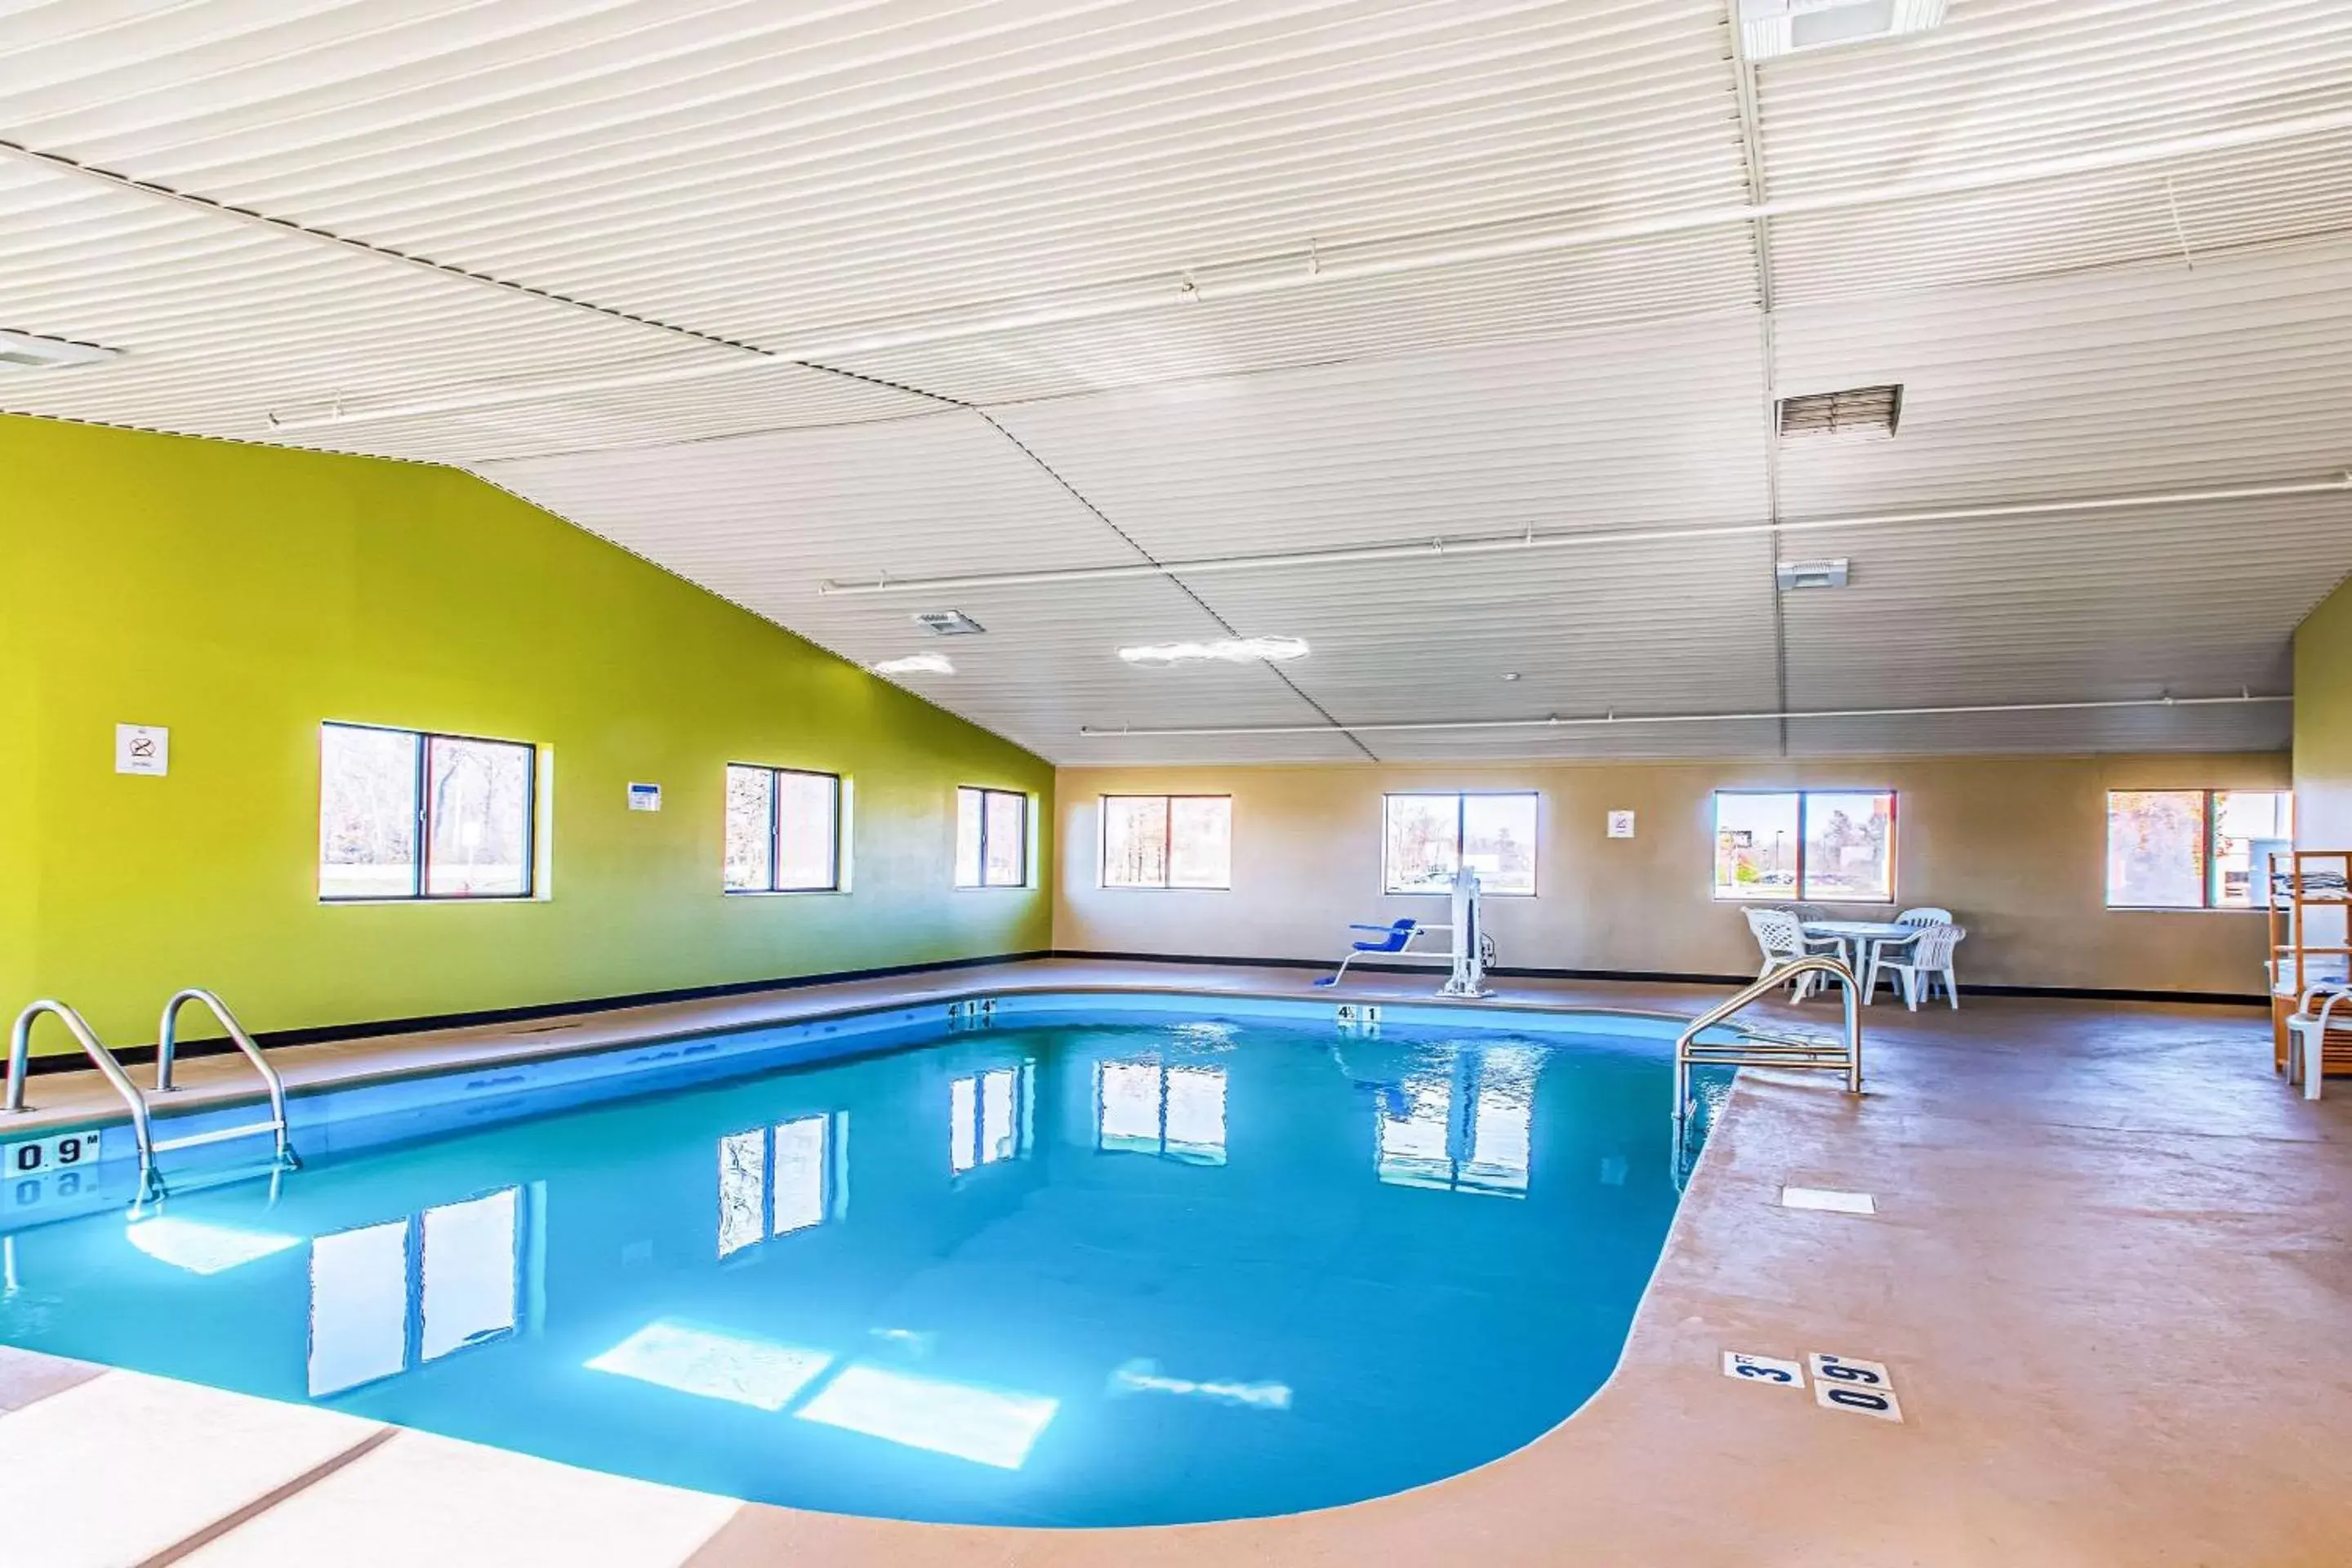 On site, Swimming Pool in Quality Inn Carbondale University area